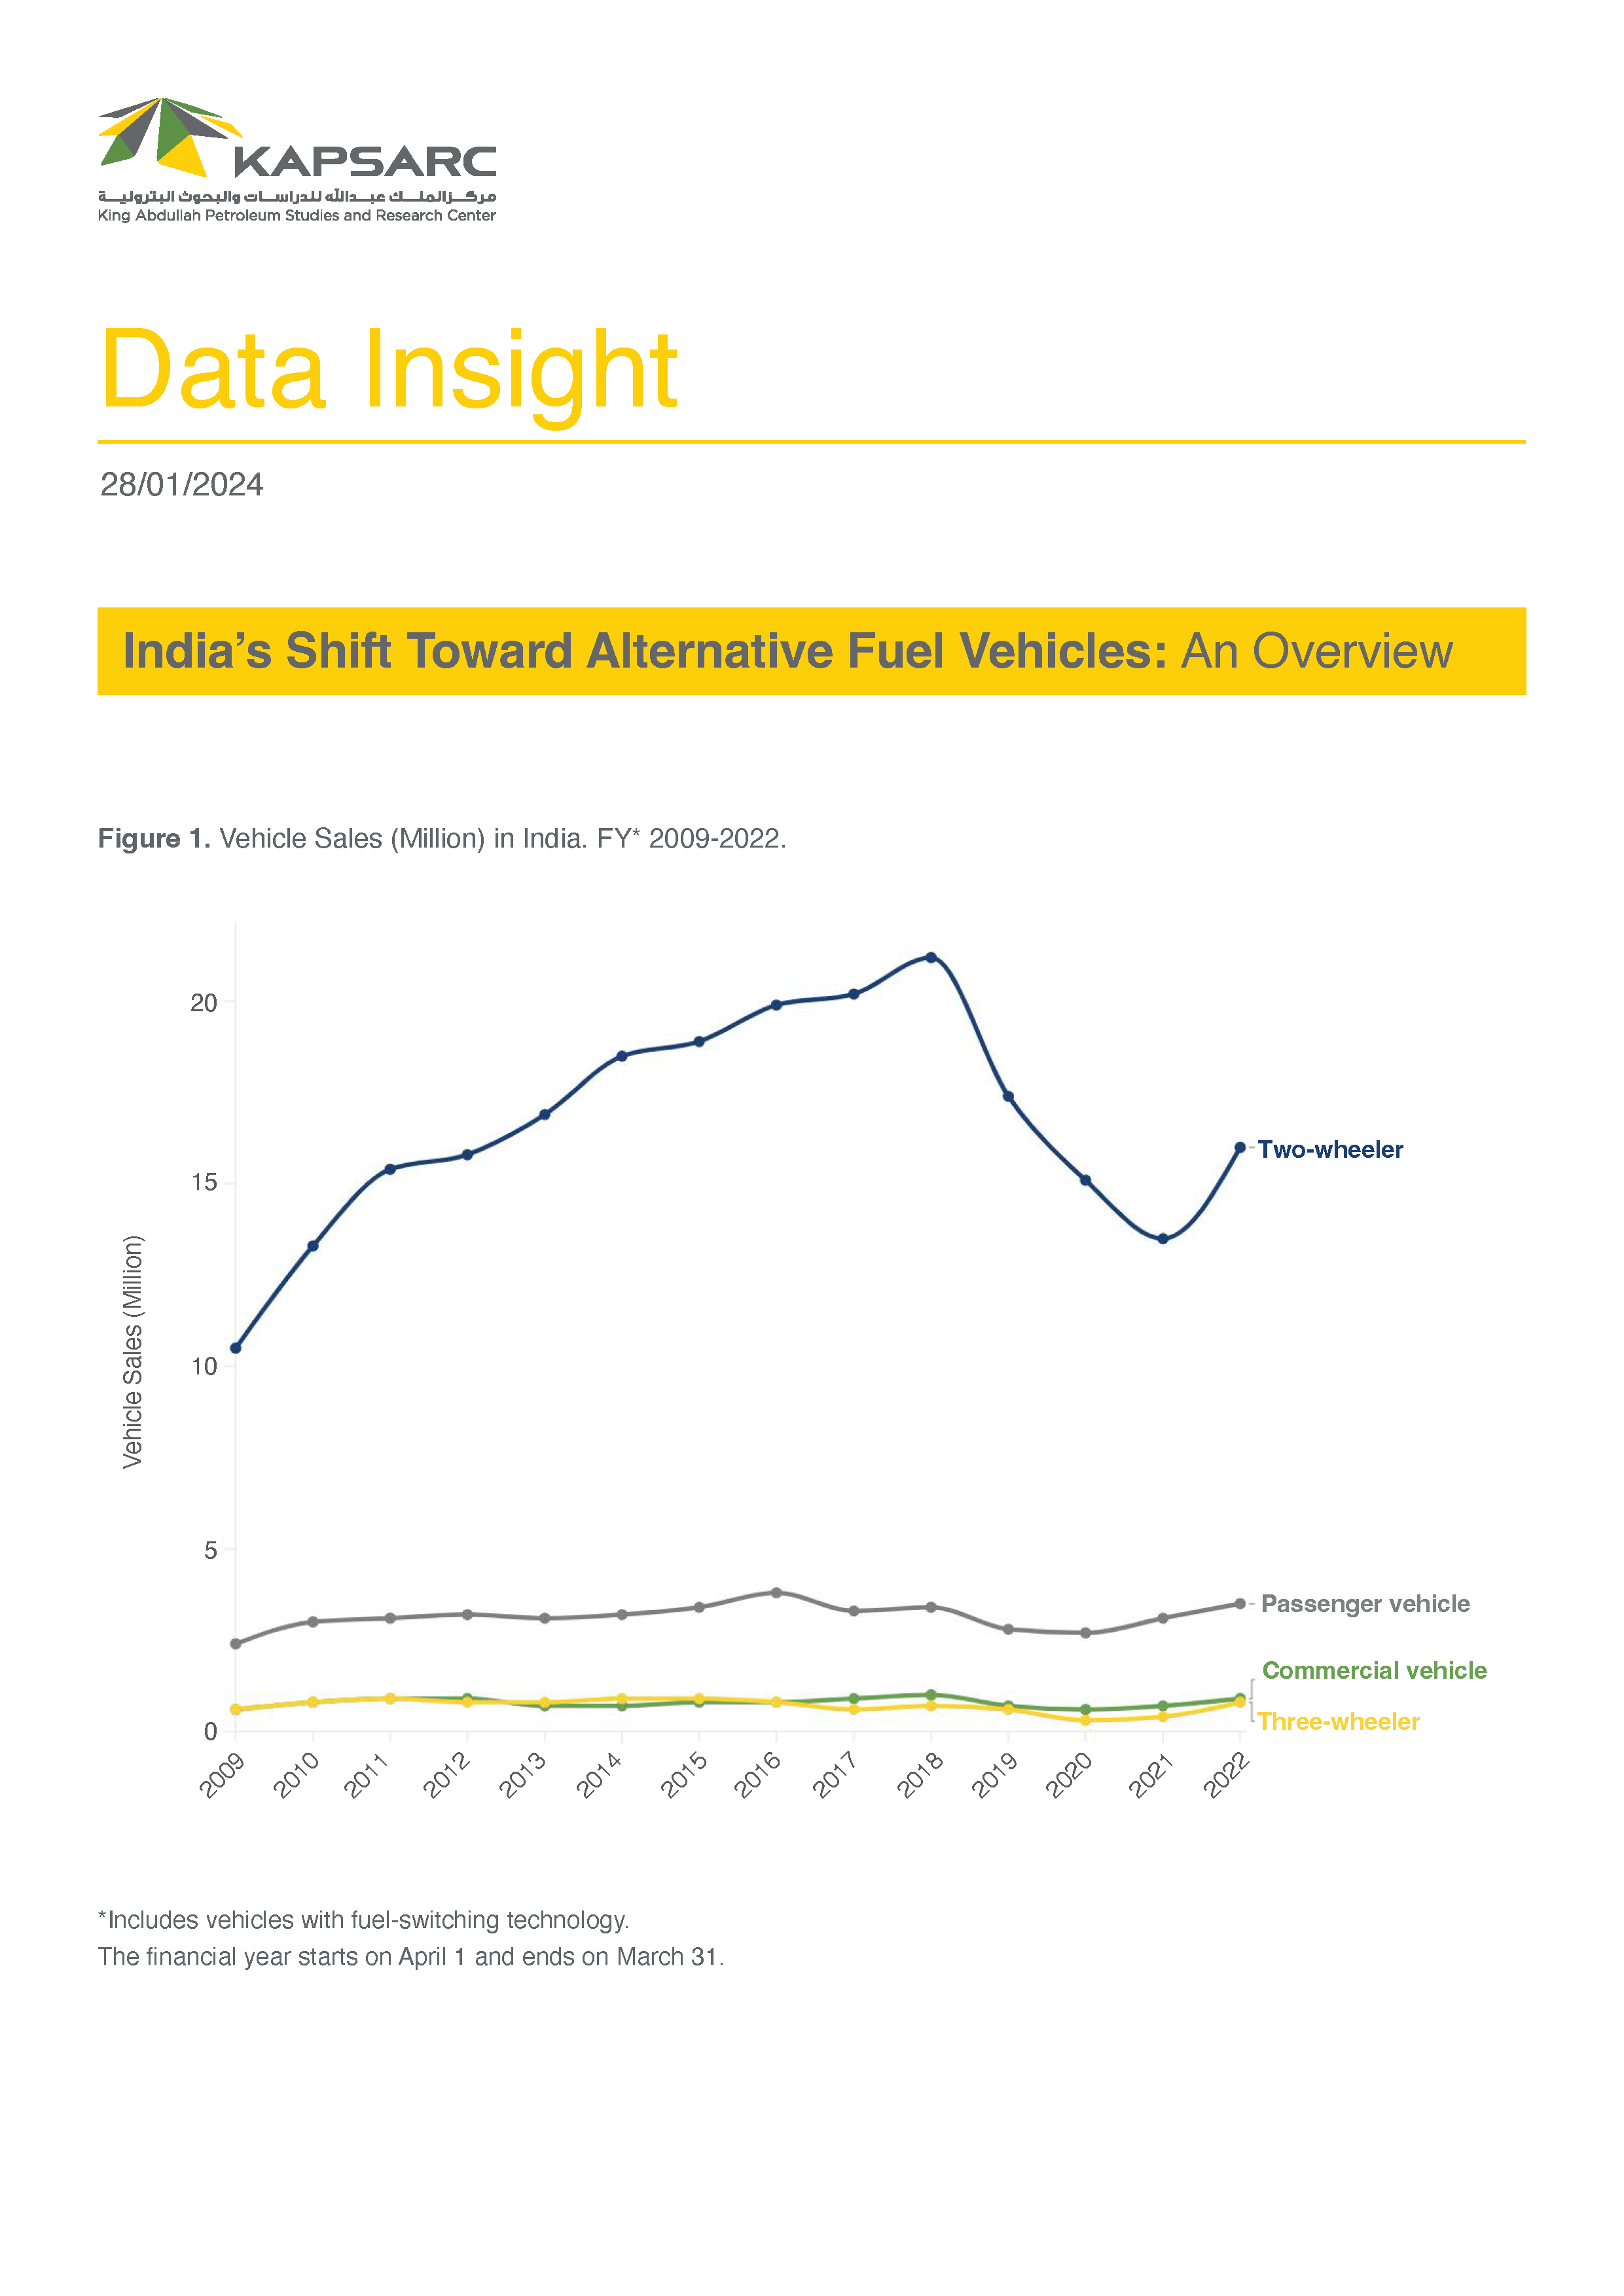 India’s Shift Toward Alternative Fuel Vehicles: An Overview